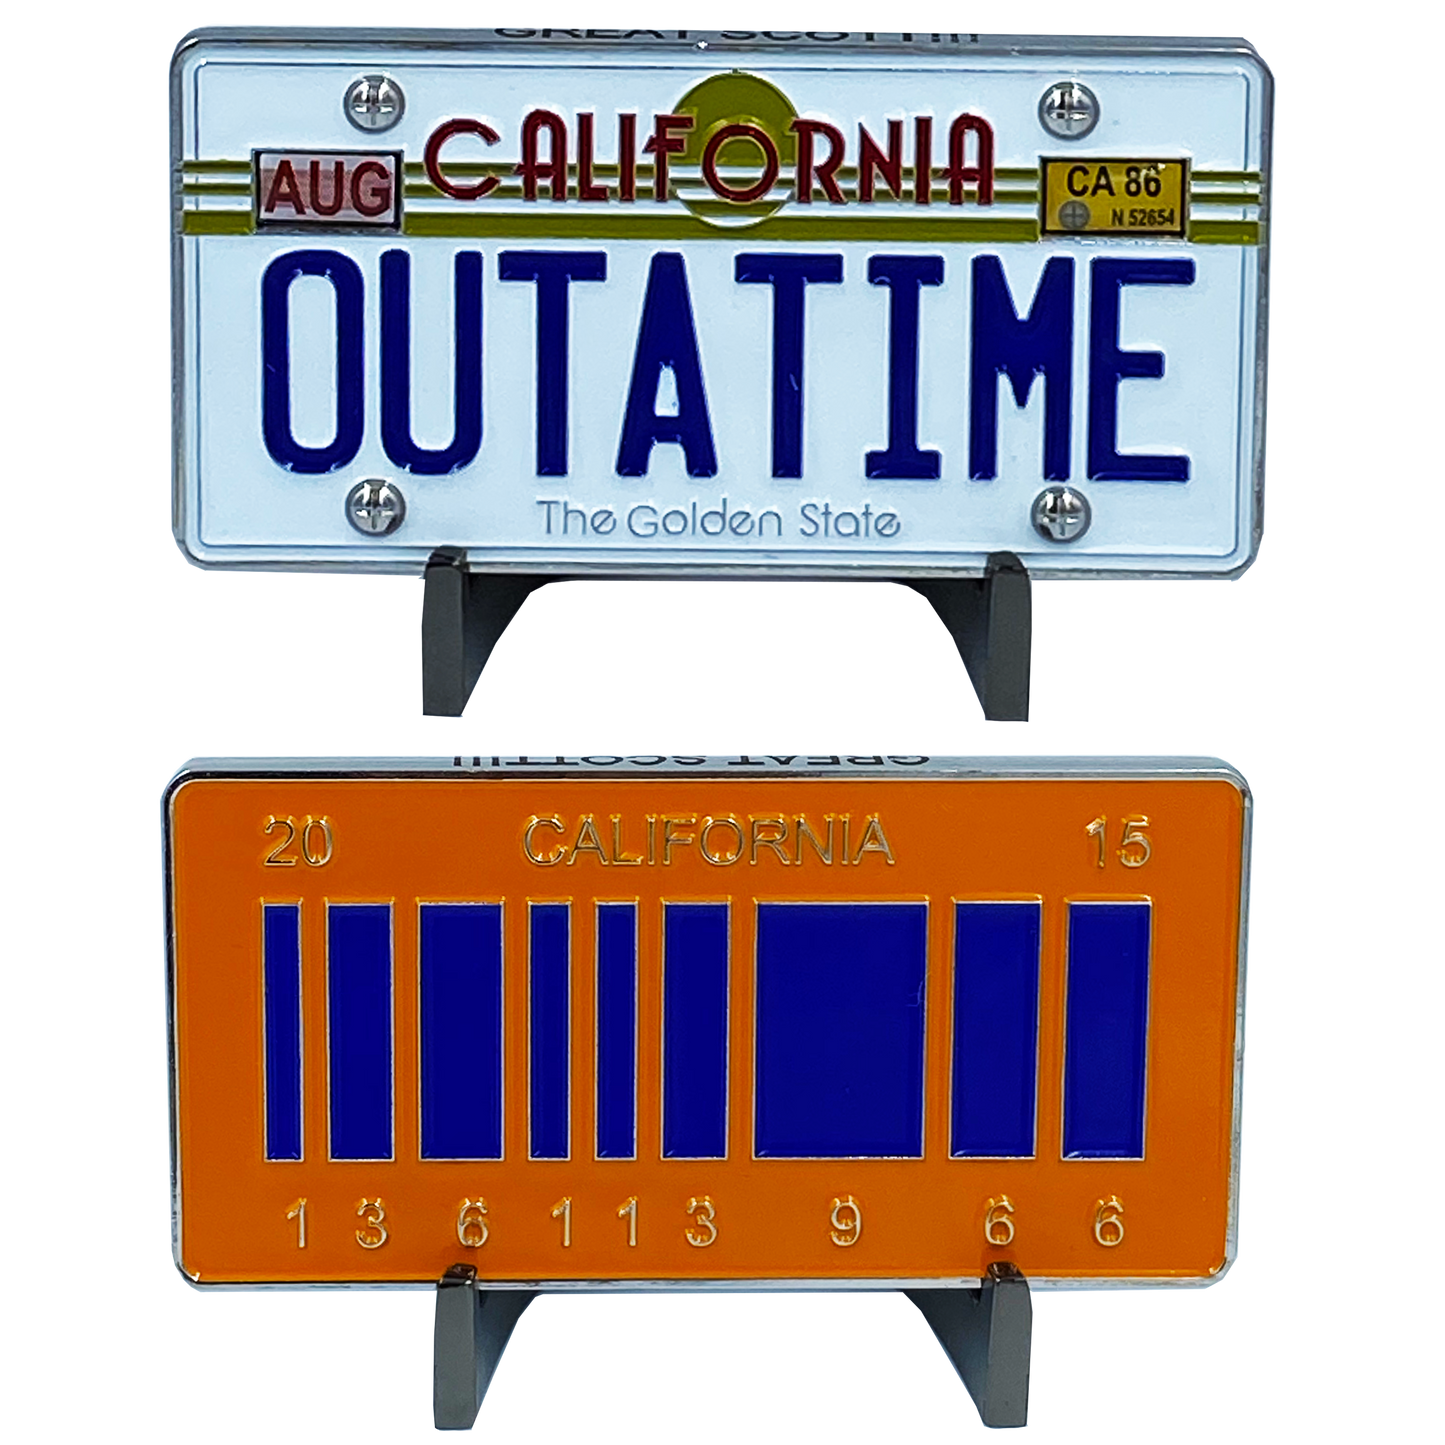 Discontinued DL8-06 Back to the Future inspired OUTATIME Delorean California License Plate Challenge Coin